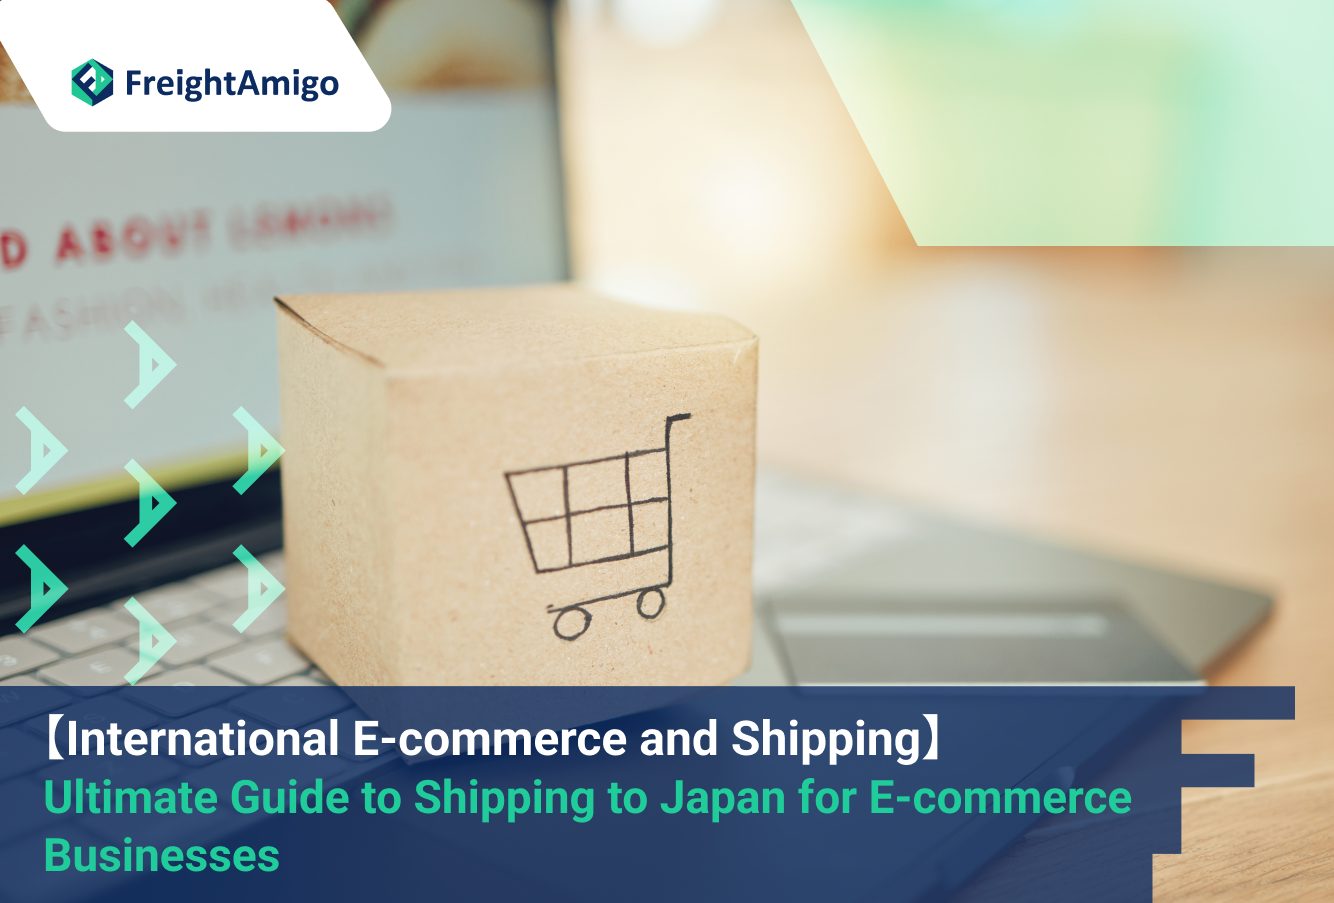 【International E-commerce and Shipping】 The Ultimate Guide to Shipping to Japan for E-commerce Businesses